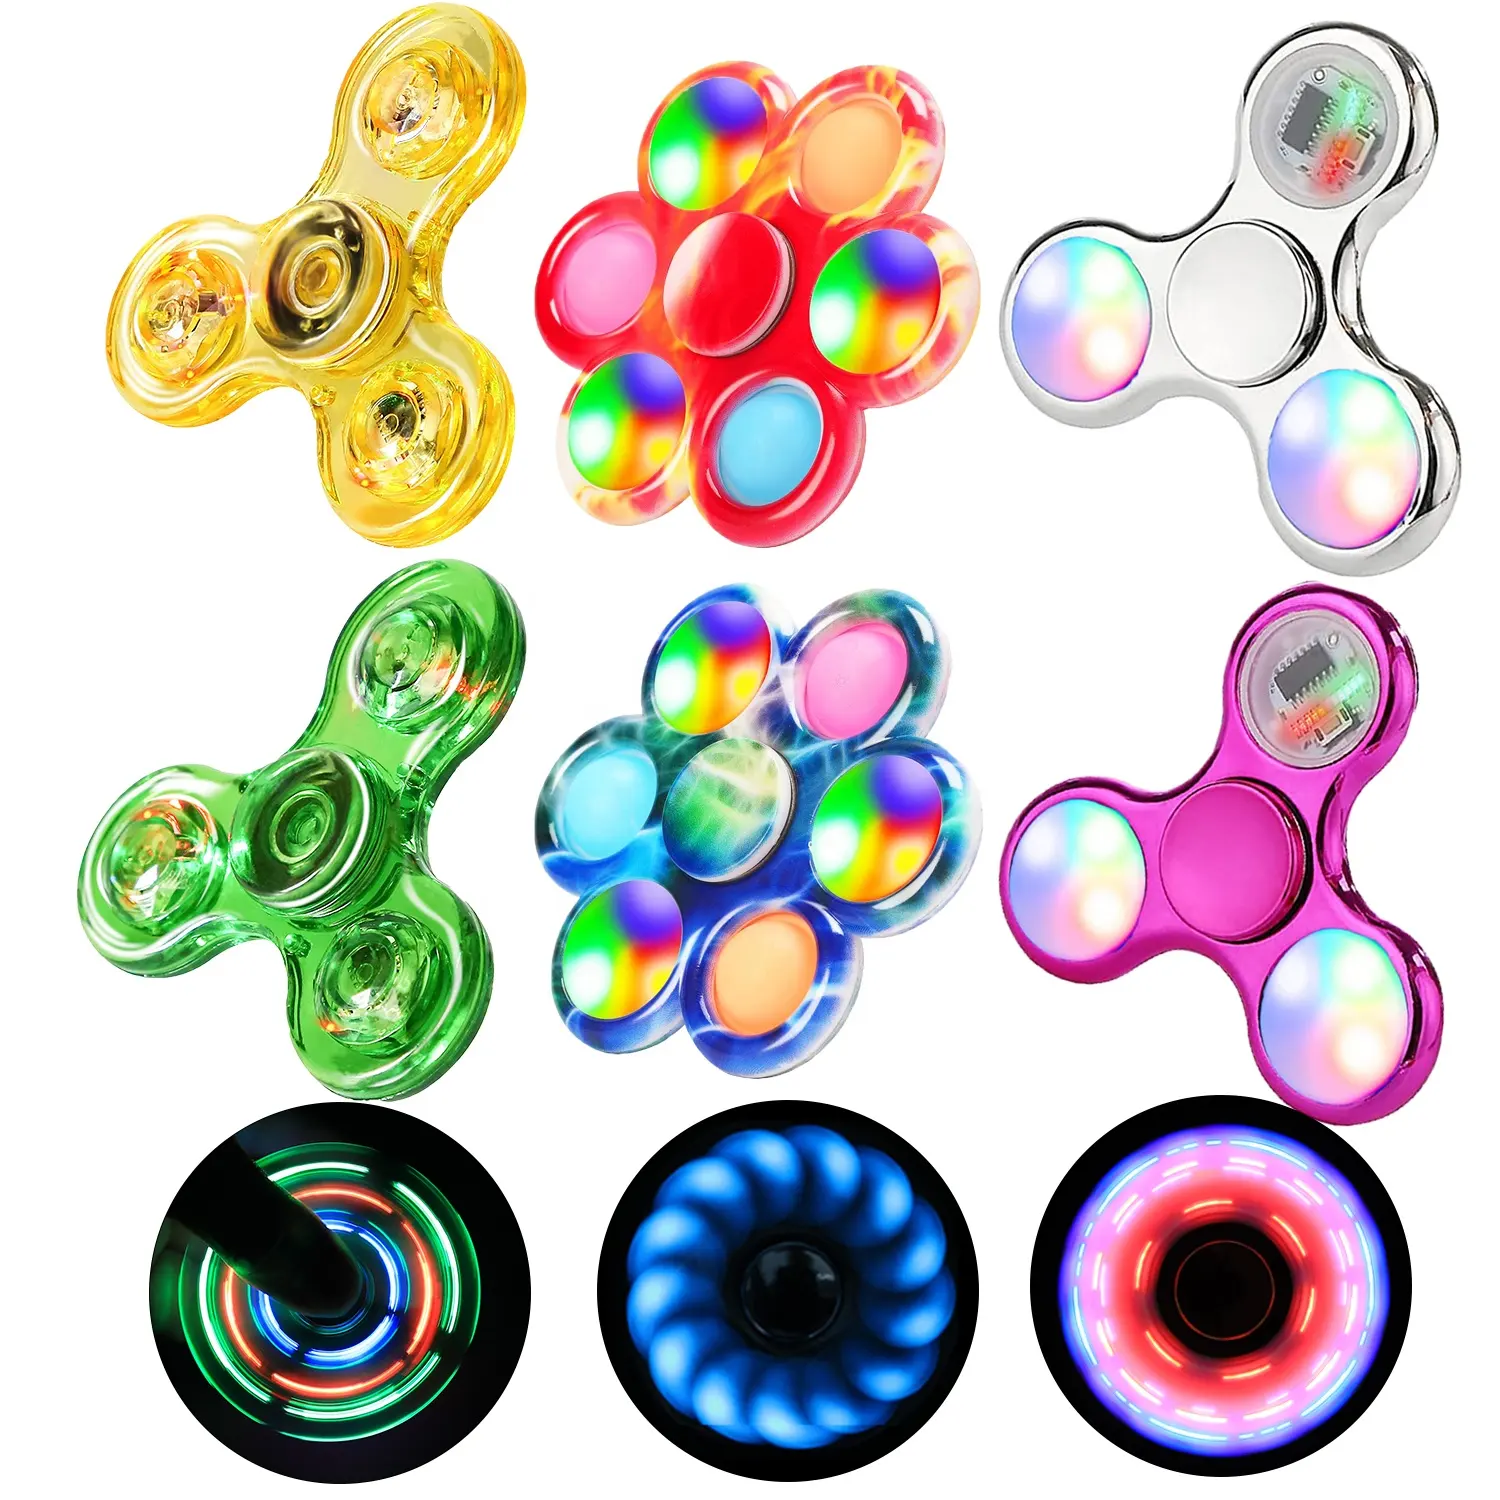 Whole Sale ODM LED Light hand spinner Fidget toy with 32 various flash patterns 